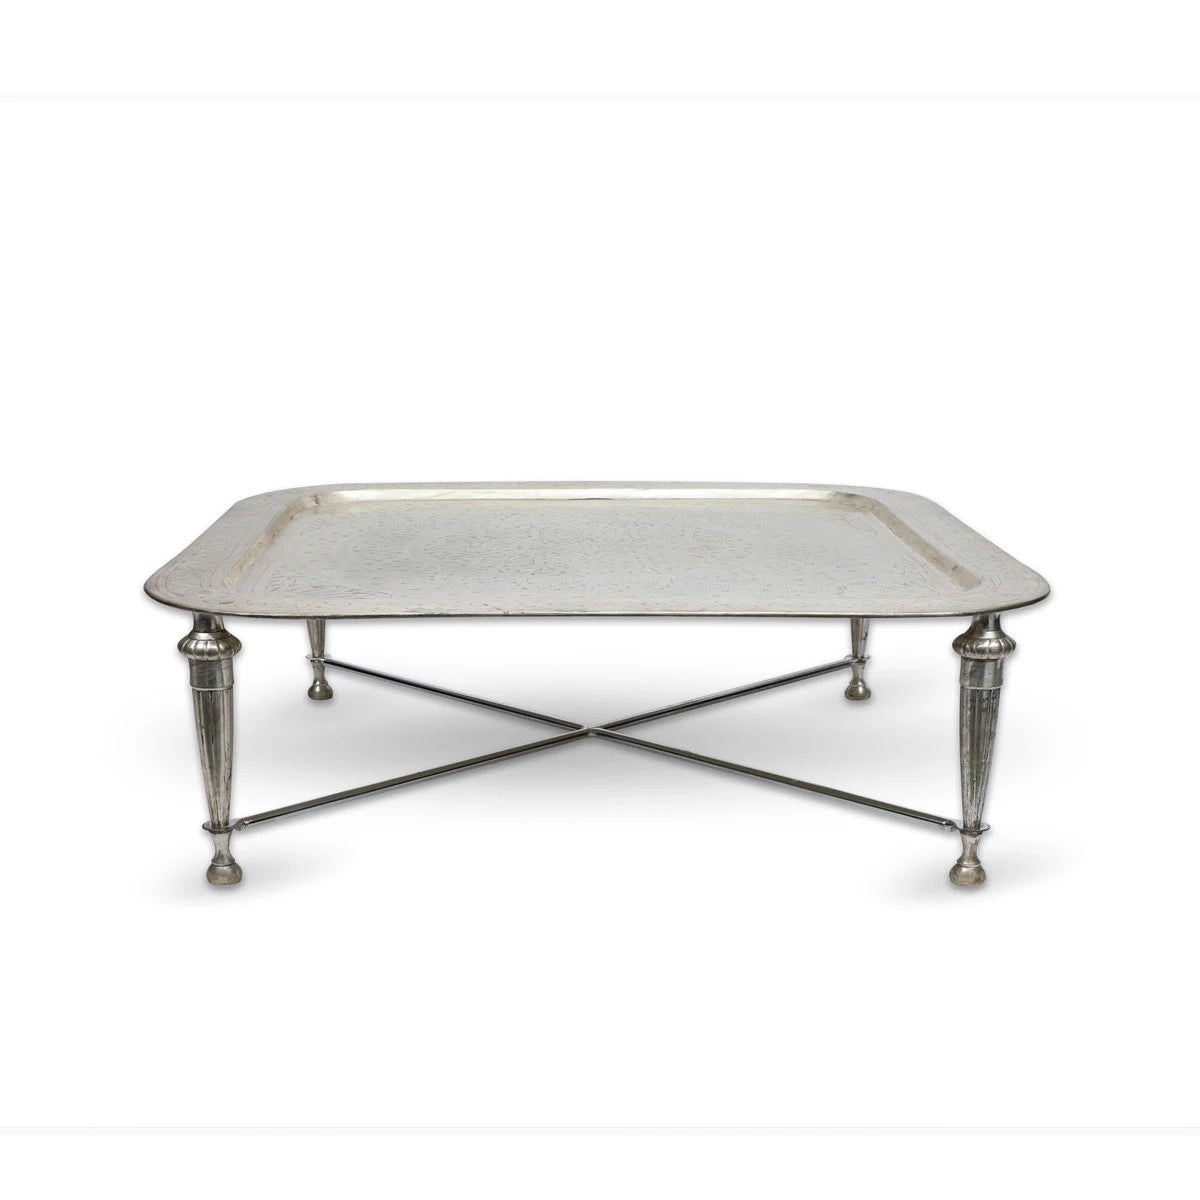 Side View of Squared Antique Brass Table - Silver